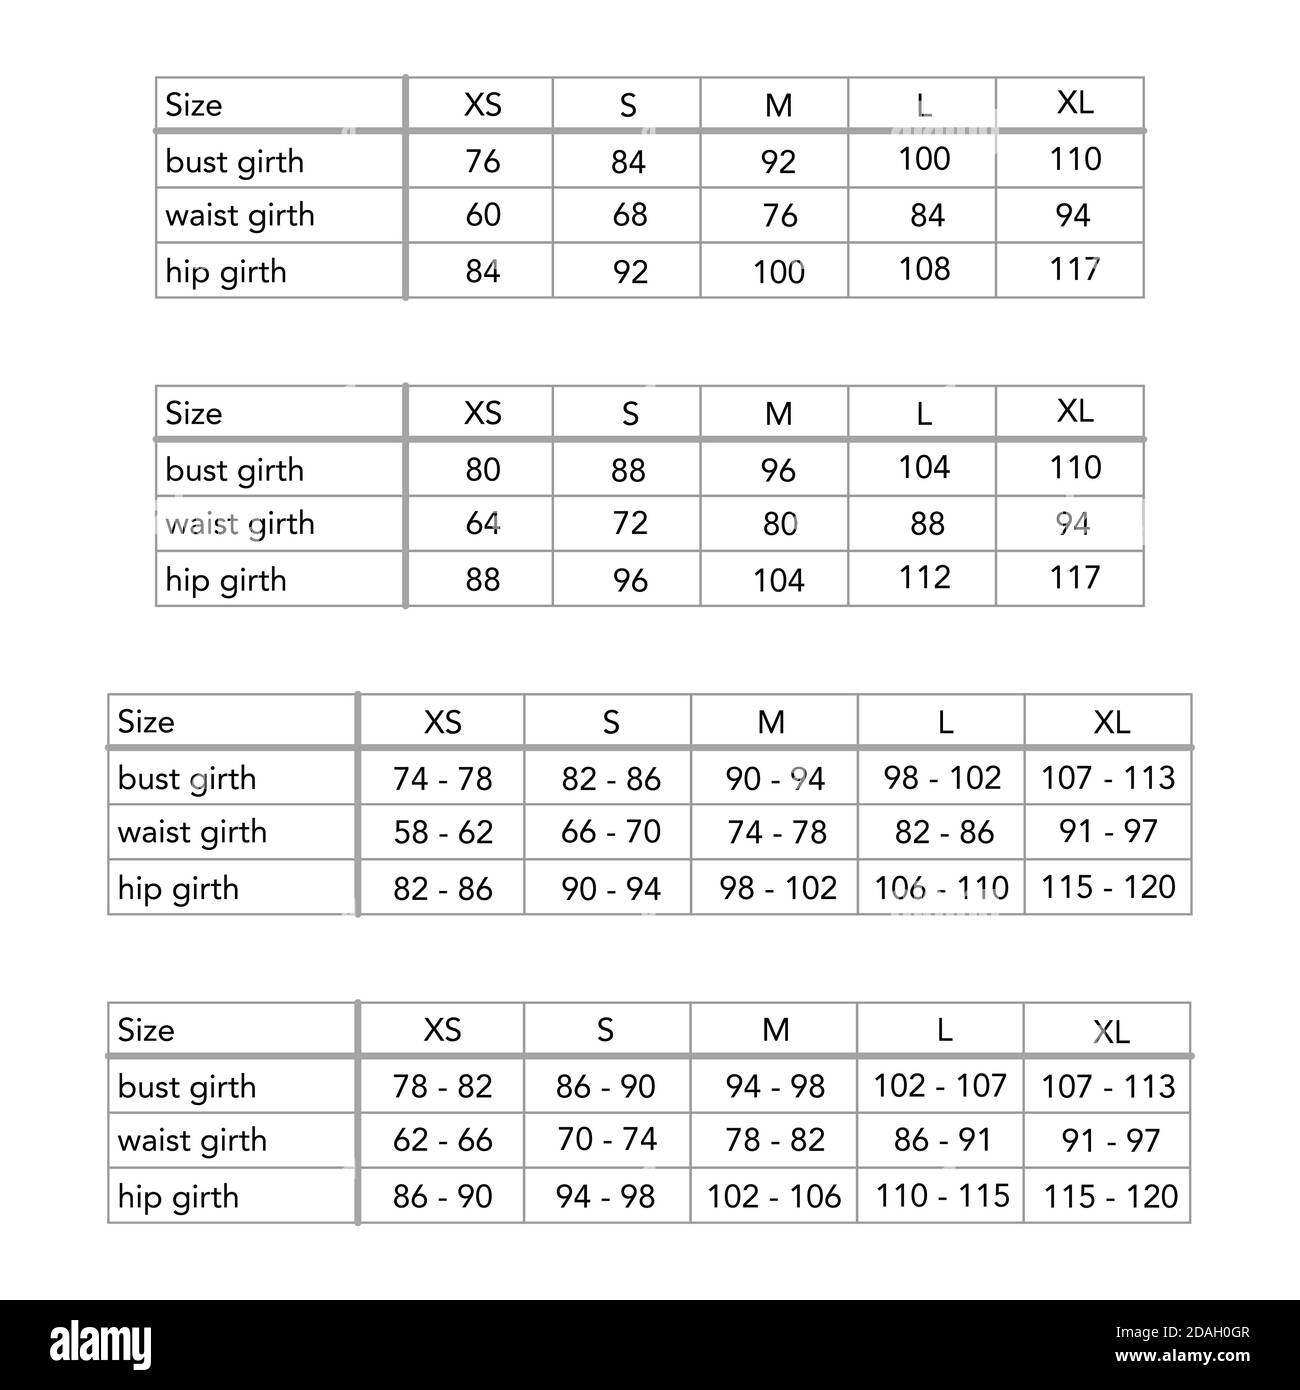 Women new European system clothing standard body measurements for different  brands, style fashion lady size chart for site, production and online  clothes shop. XS, S, M, L, XL, bust, waist, hip girth